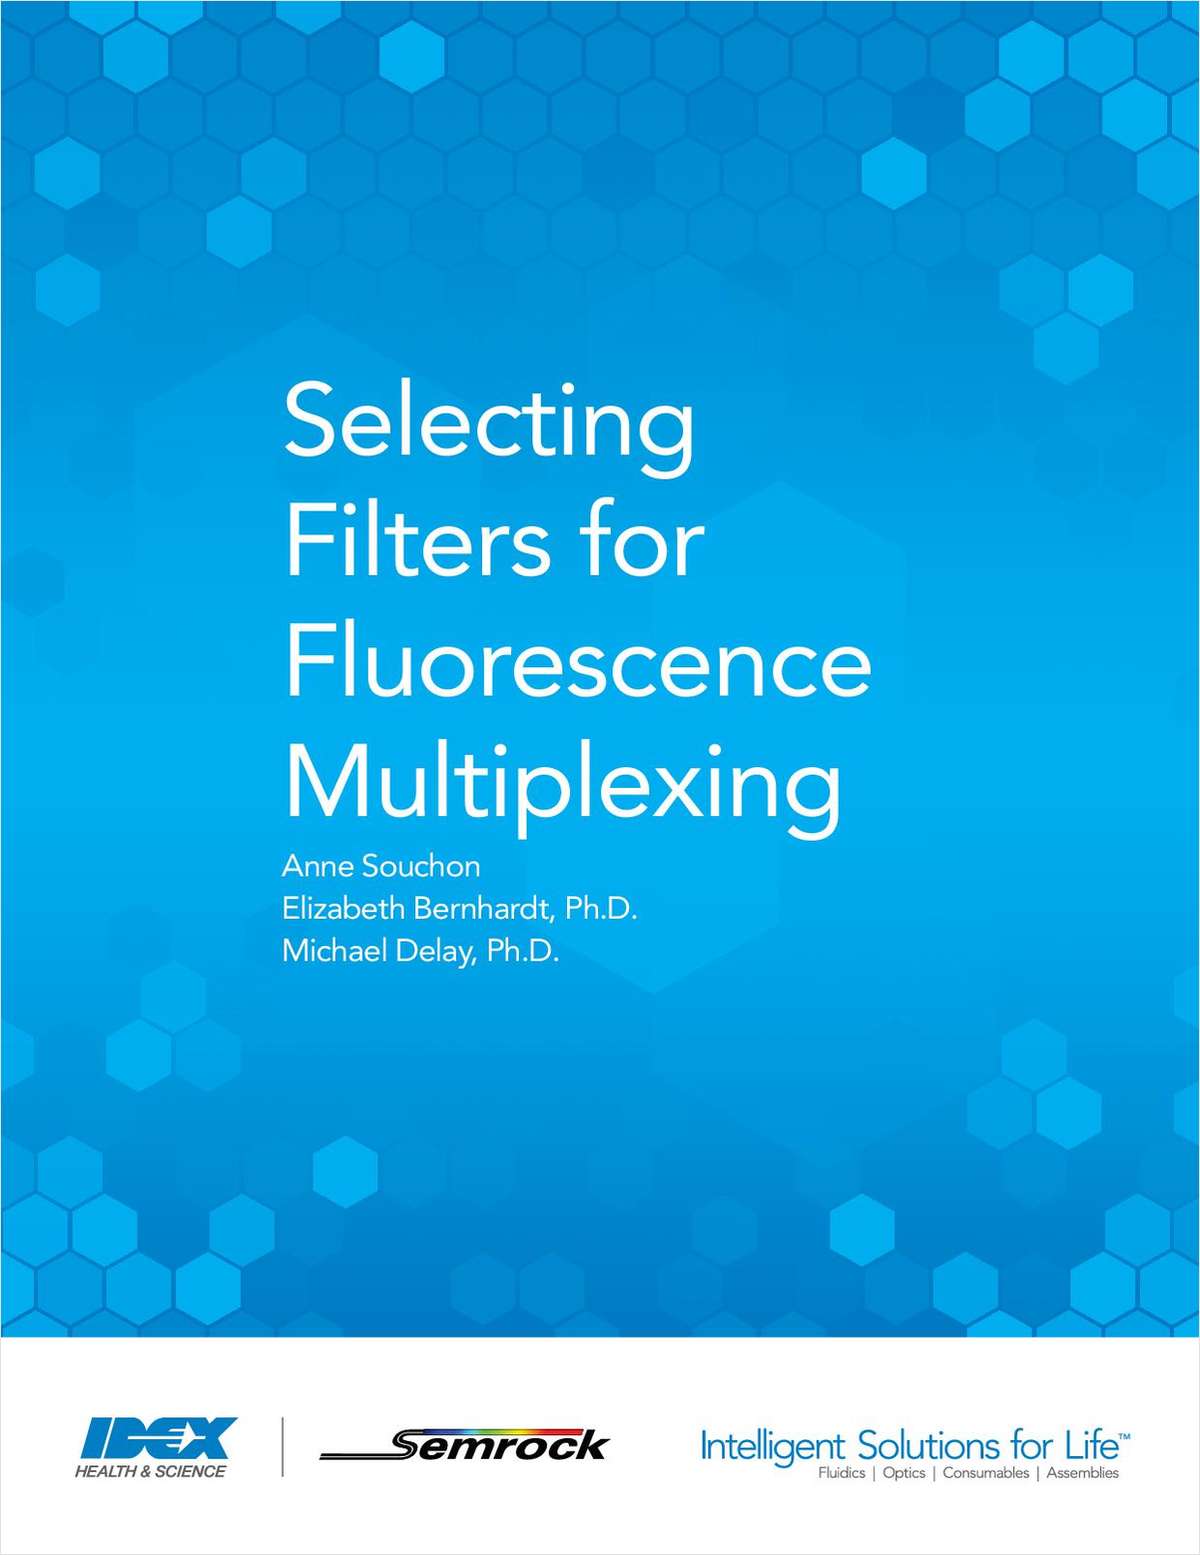 Selecting Filters for Fluorescence Multiplexing